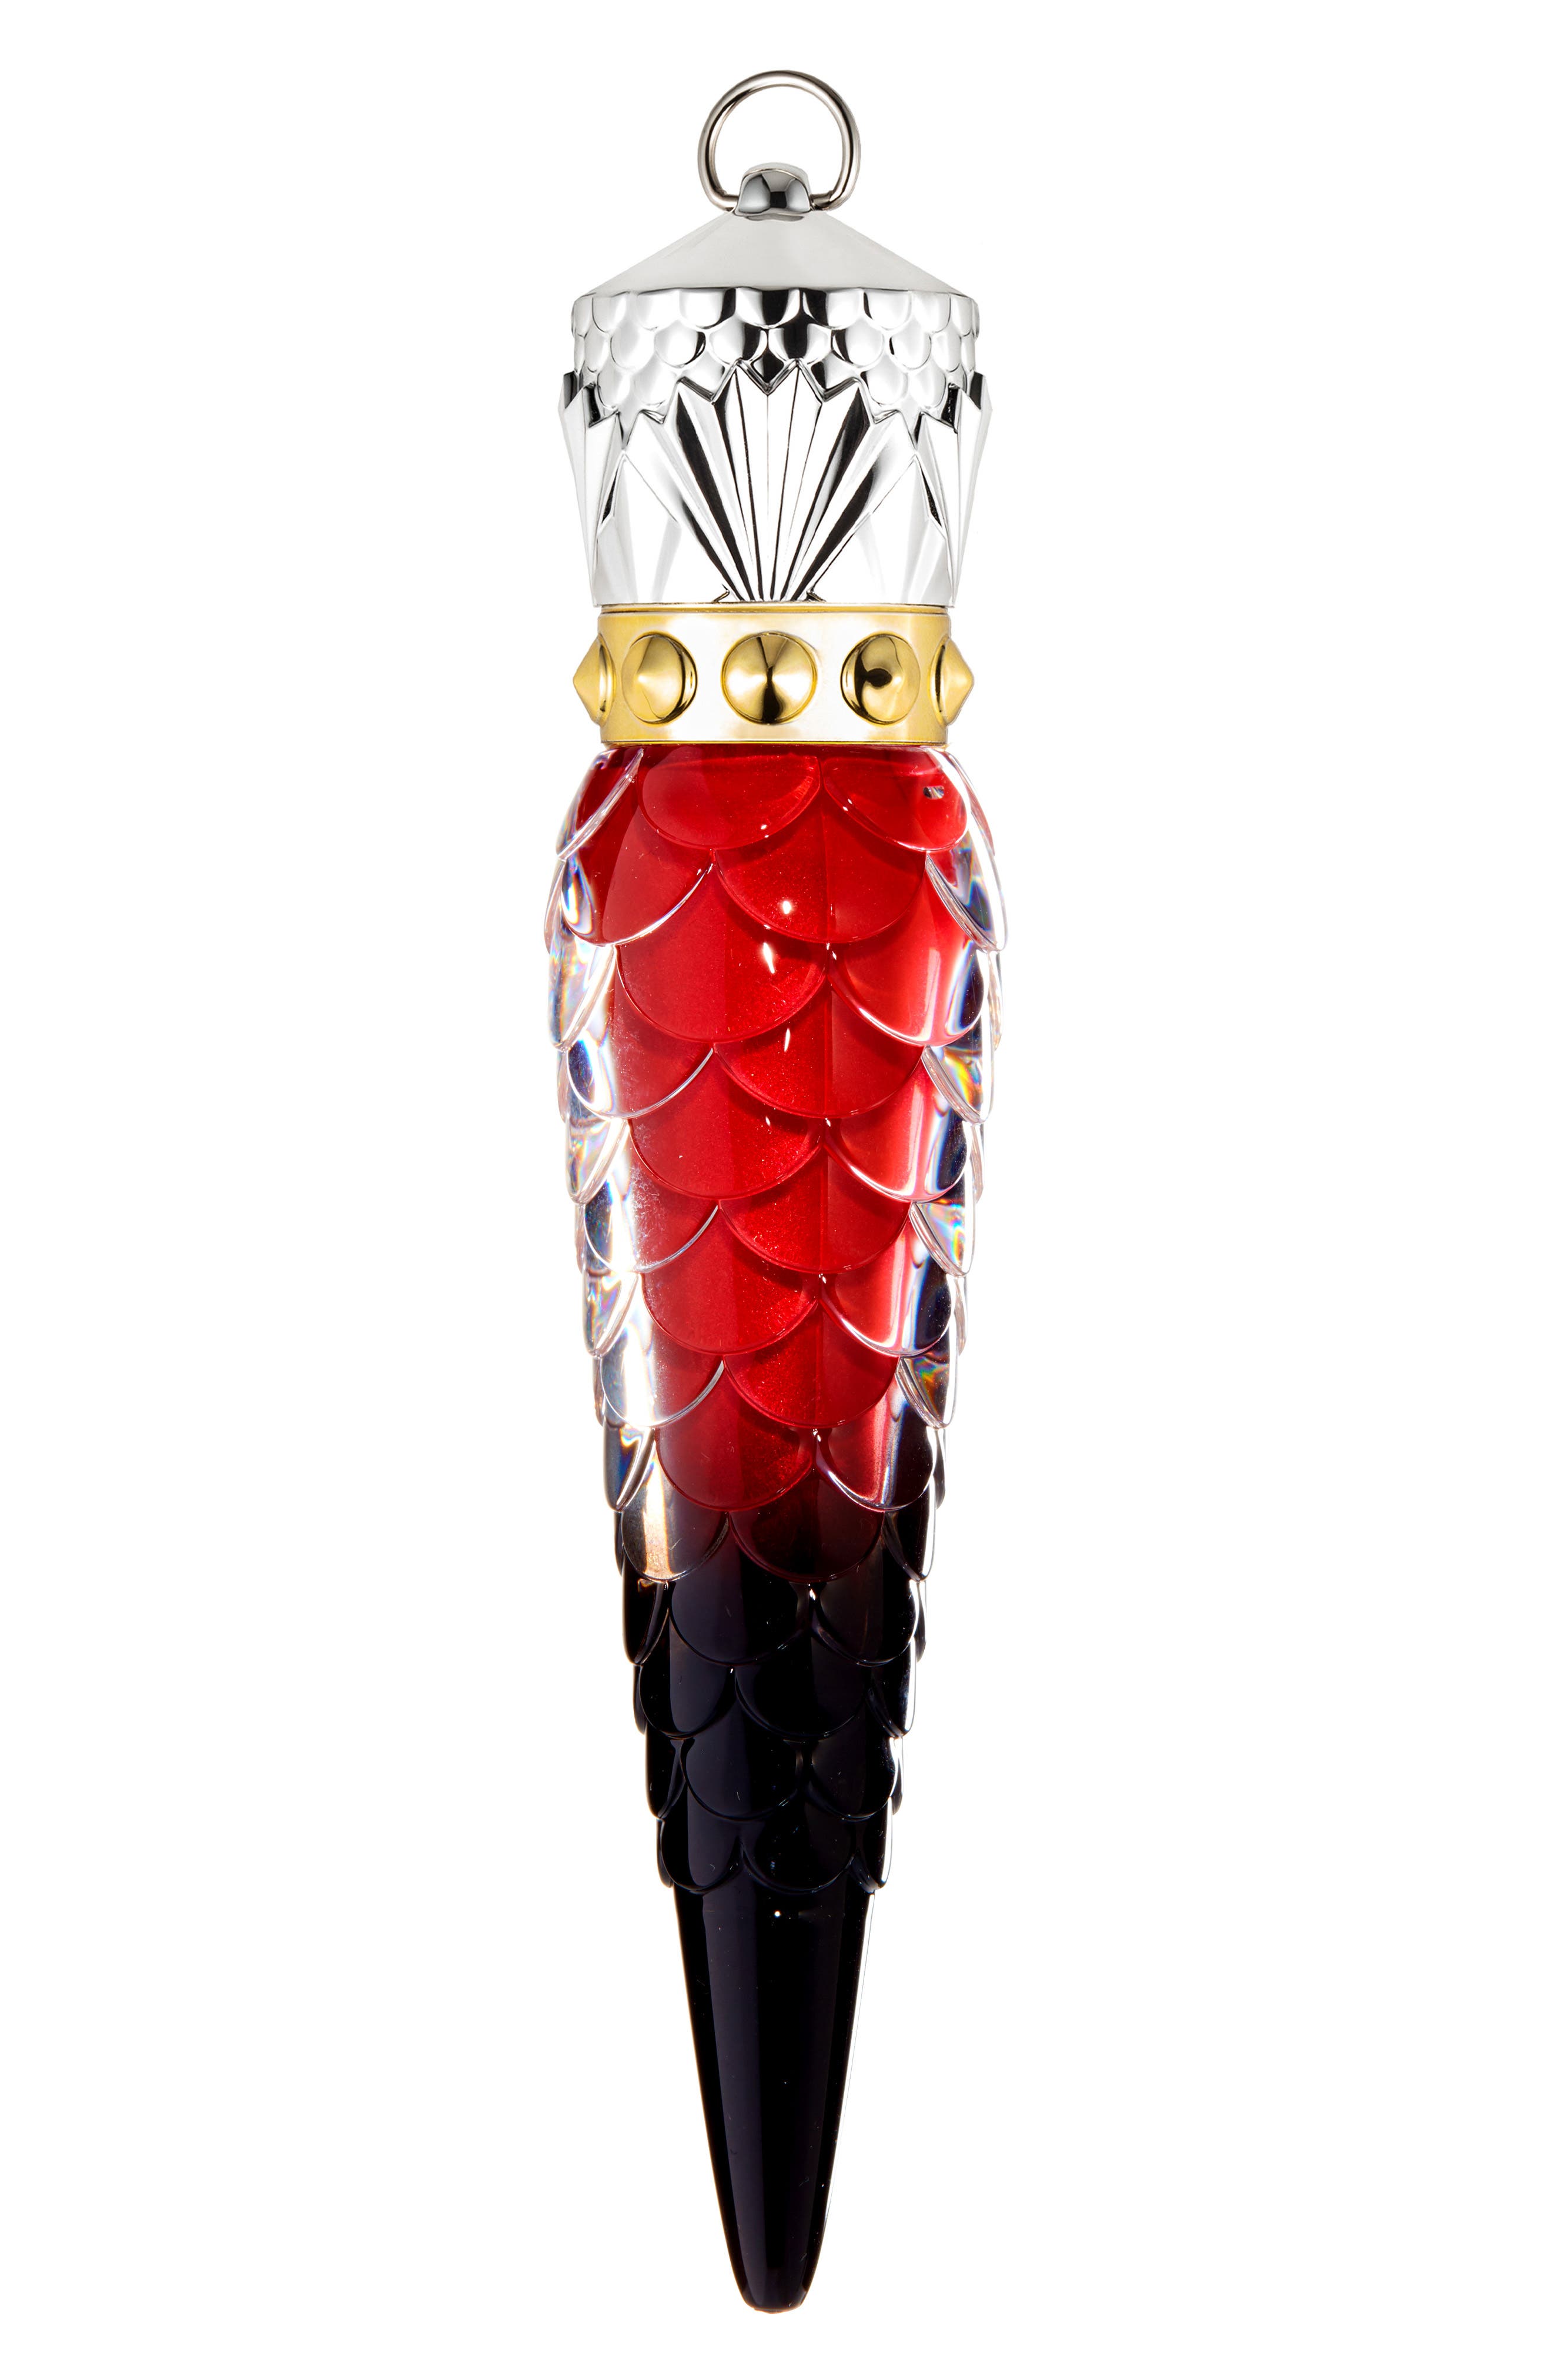 Christian Louboutin Matte Fluid Lip Color in Rouge Louboutin /Metallic at Nordstrom